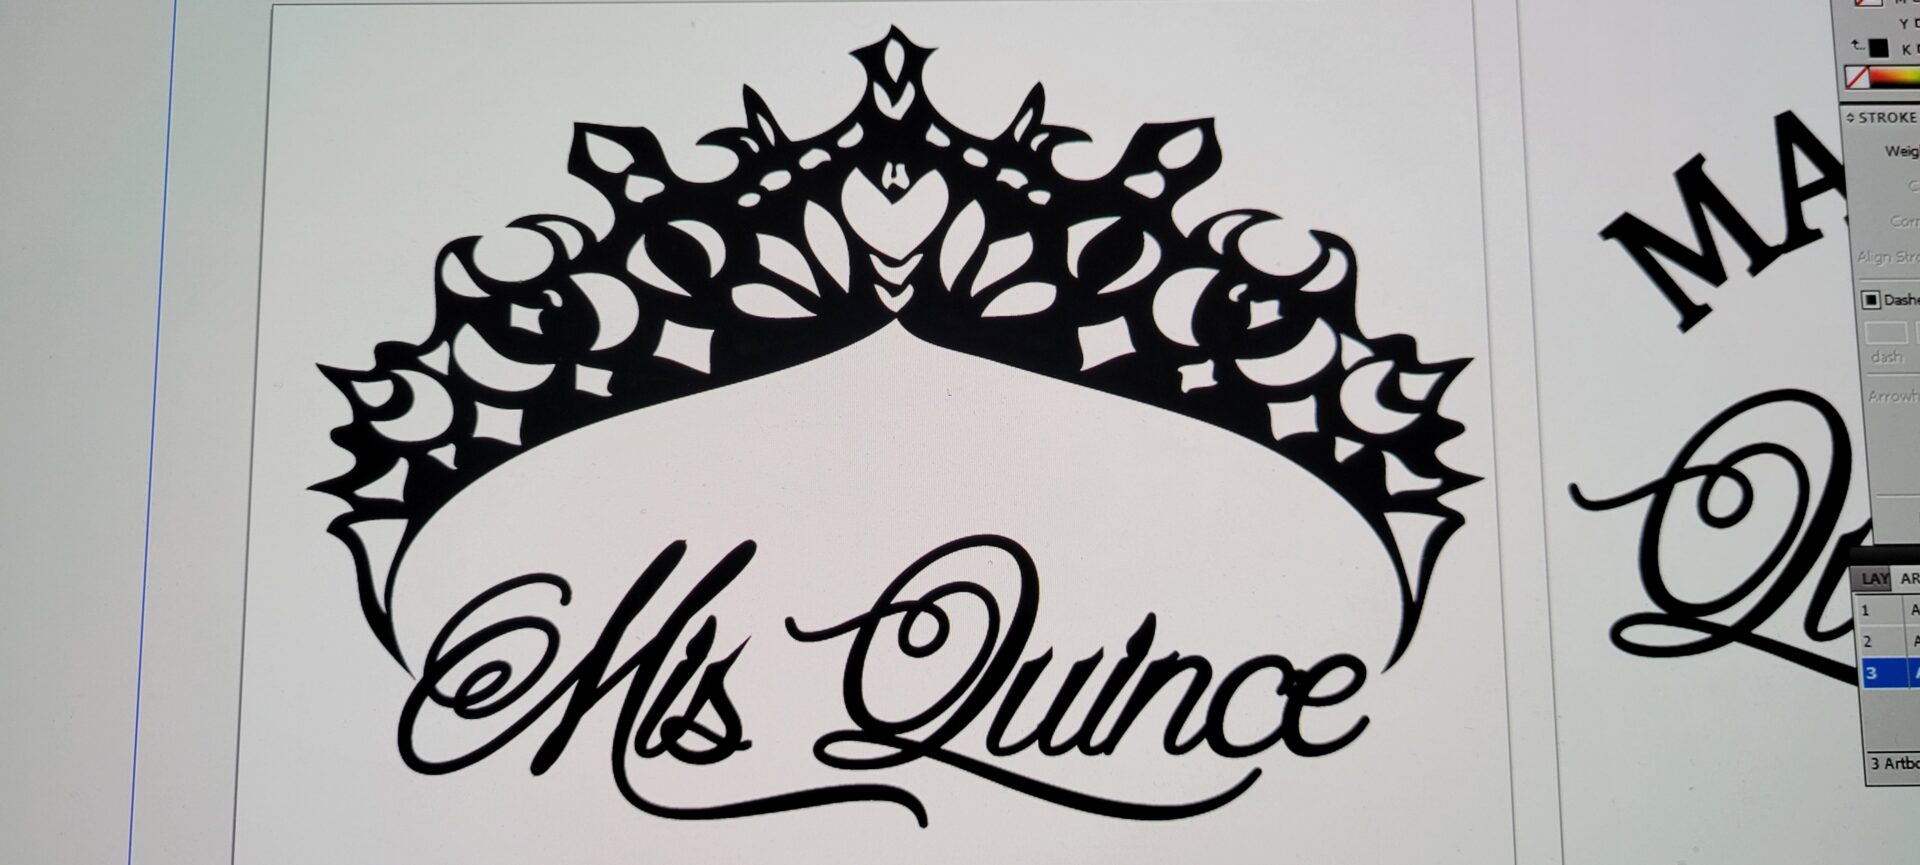 mis queen written in black with a sigh on a white background